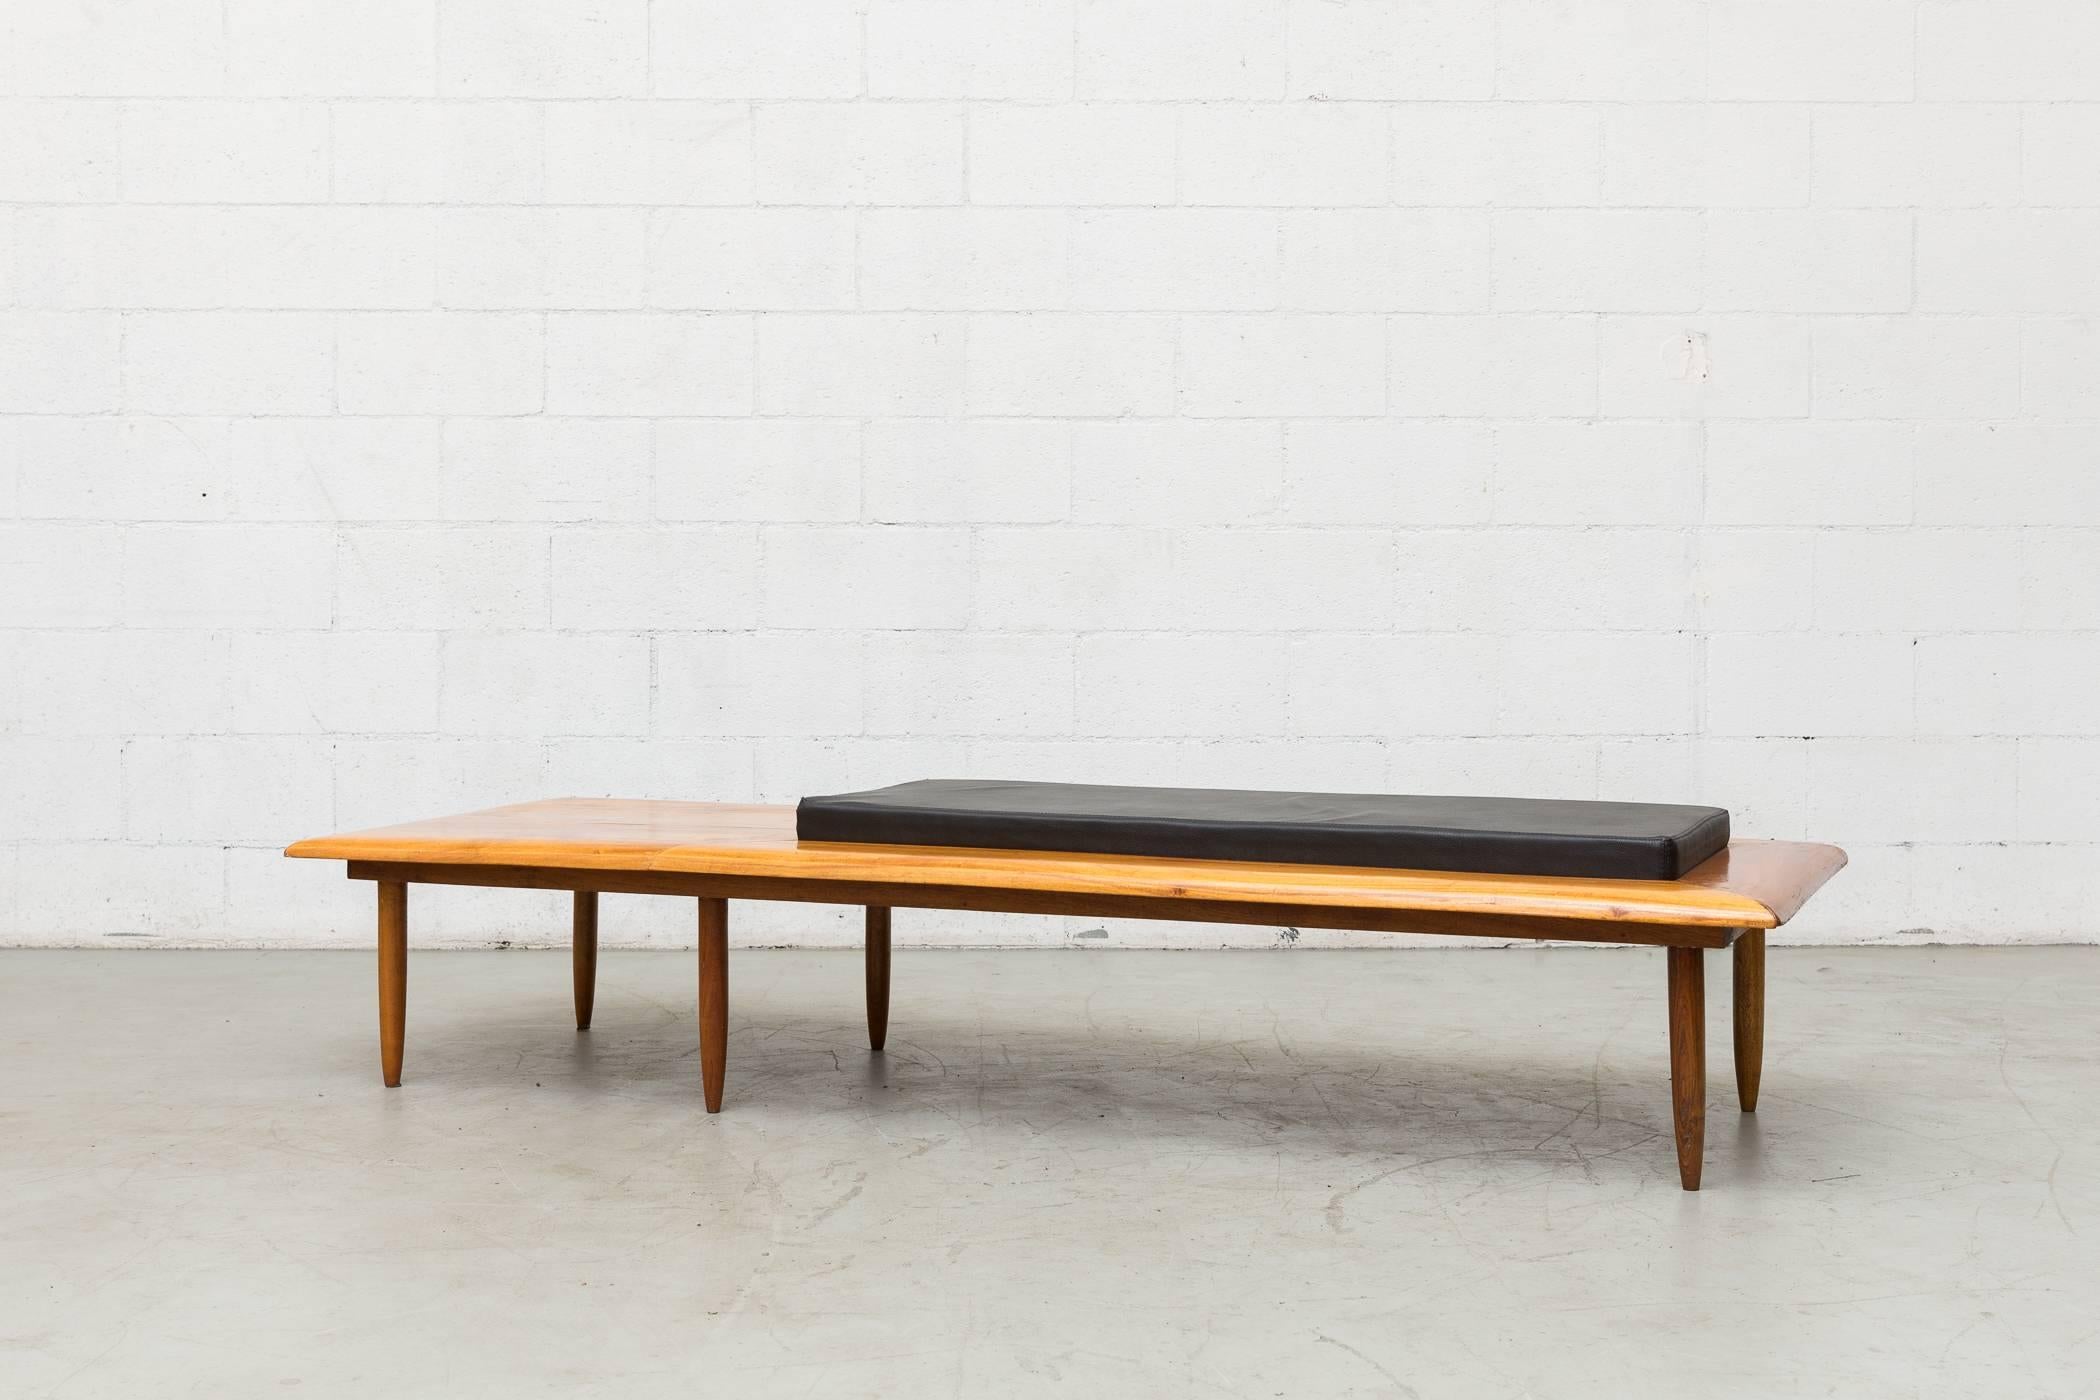 George Nelson style solid teak bench with black faux leather inset cushion seating. Gorgeous wood grain with glossy lacquered finish. Custom-made in the 1970s, Netherlands. Original condiiton.